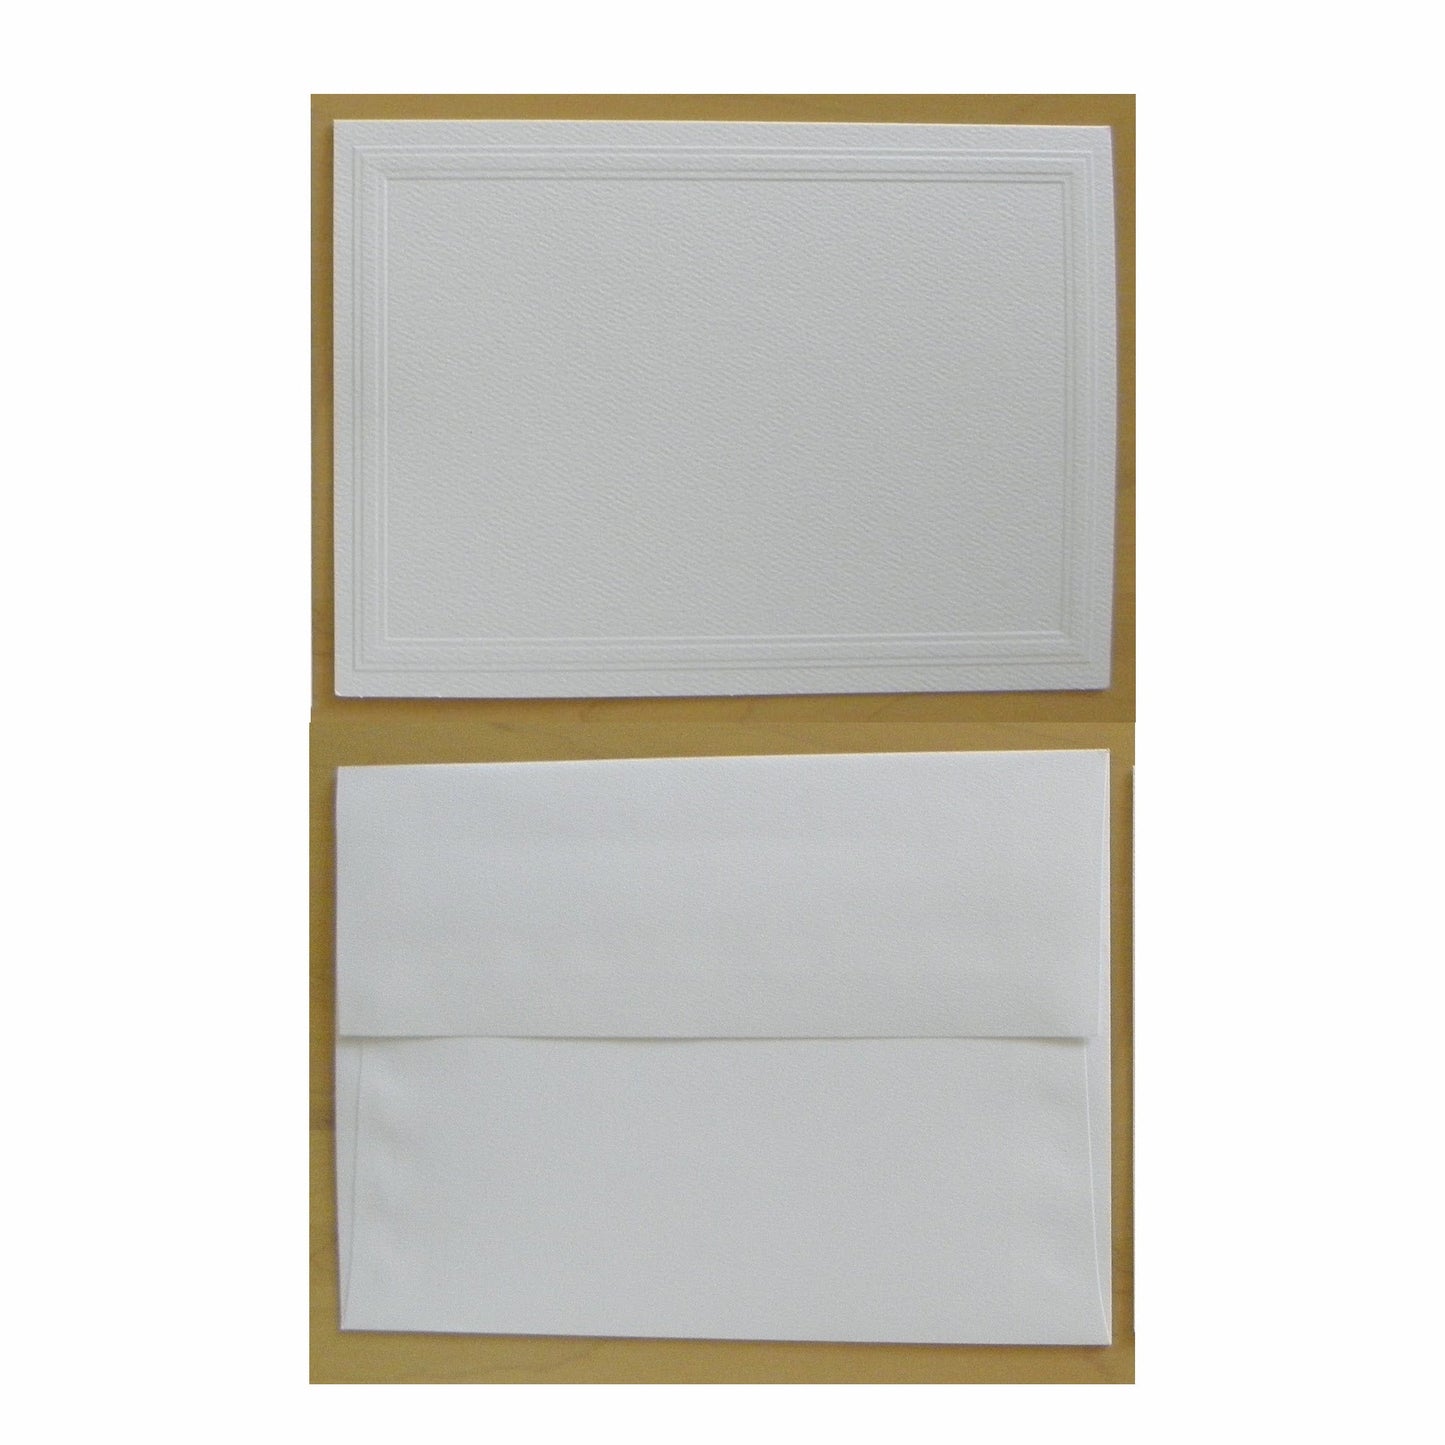 Classic Card Stock with envelope